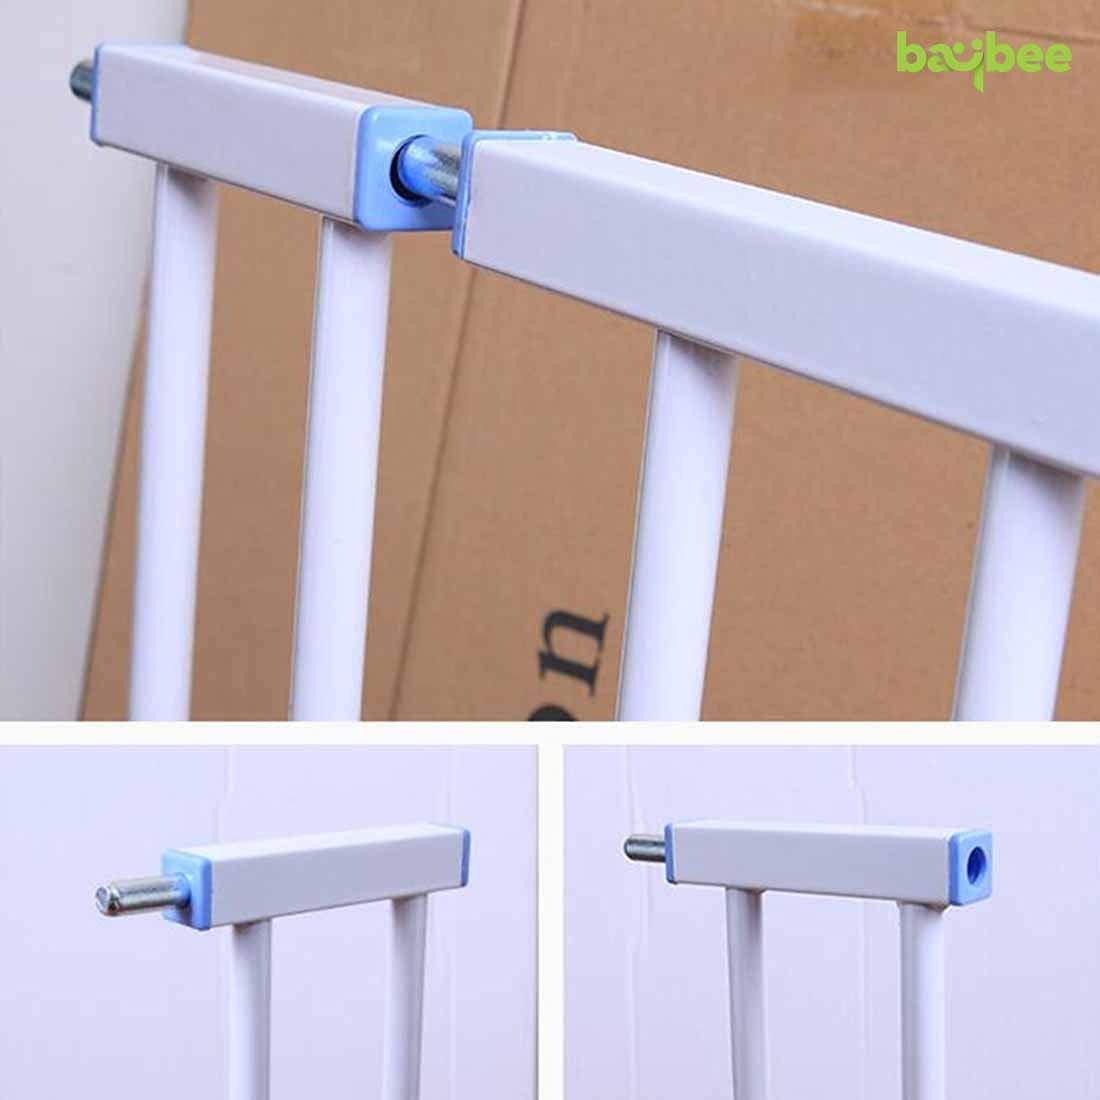 Baybee Auto Close Baby Safety Gate Extension, Extra Tall Durable Baby Gate Extension Fence Barrier Dog Gate (White - L30 x H77 CM)